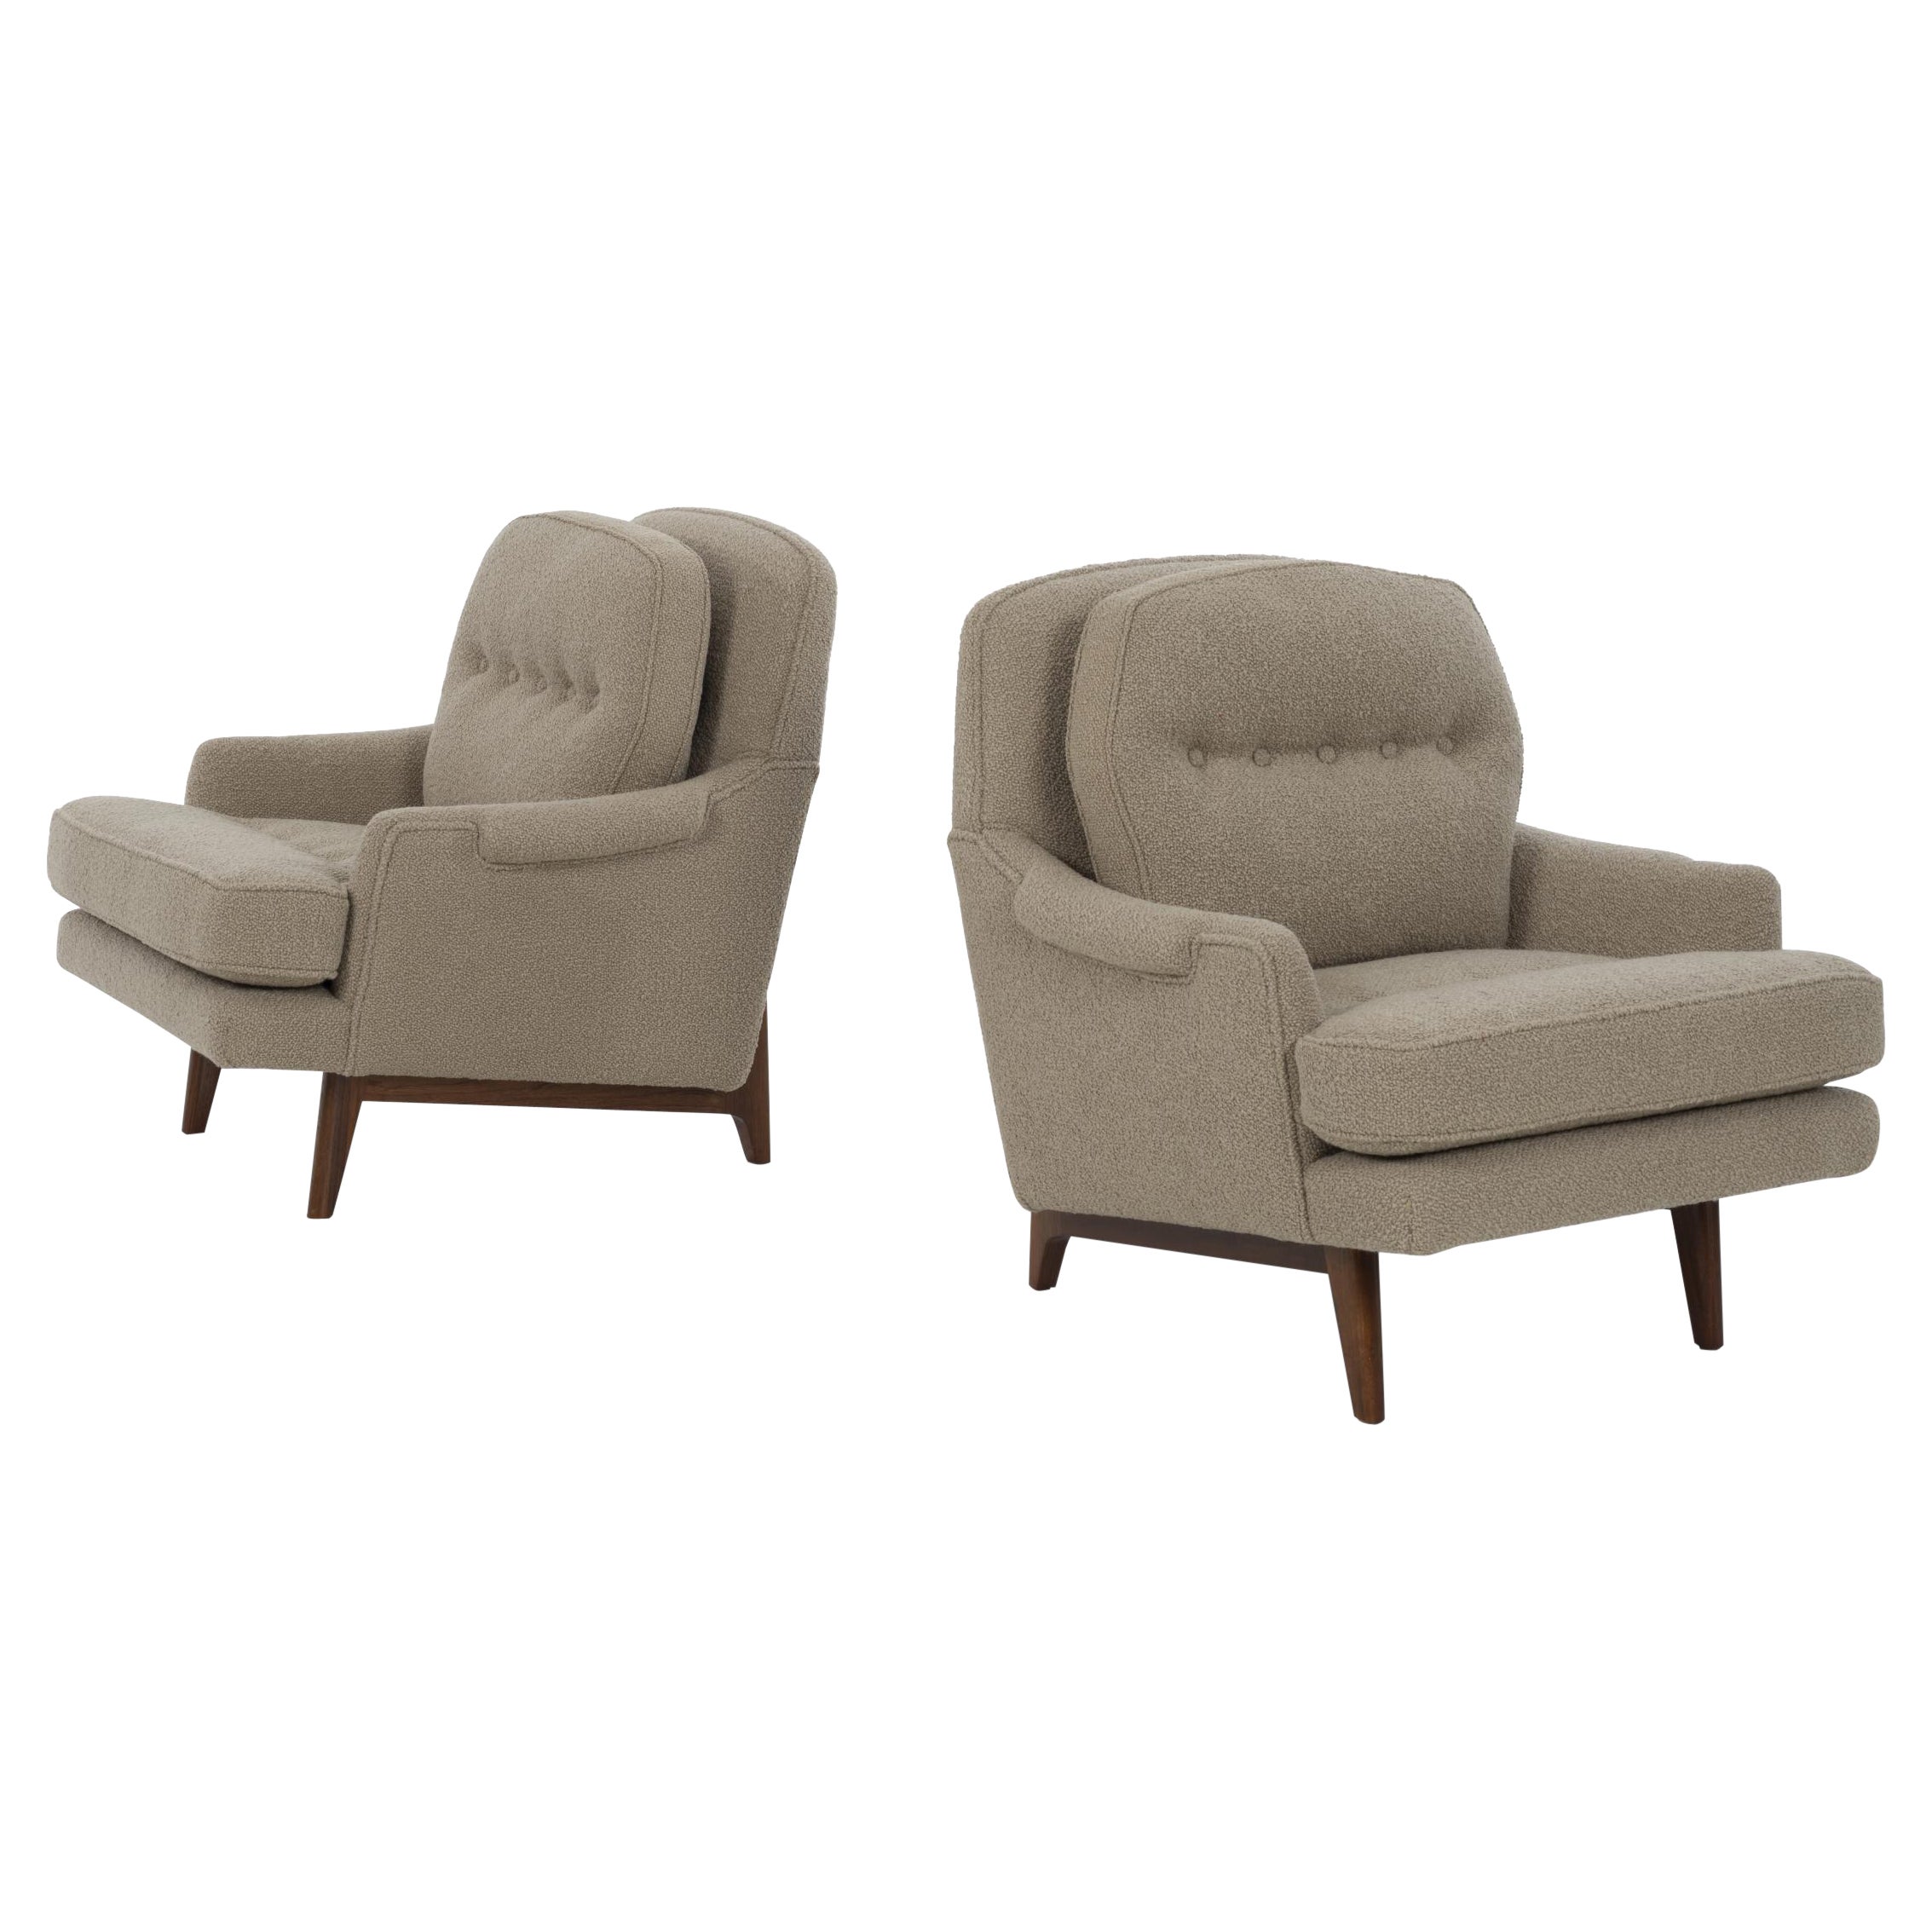 Edward Wormley for Dunbar Pair of Lounges Chairs in Knoll Boucle